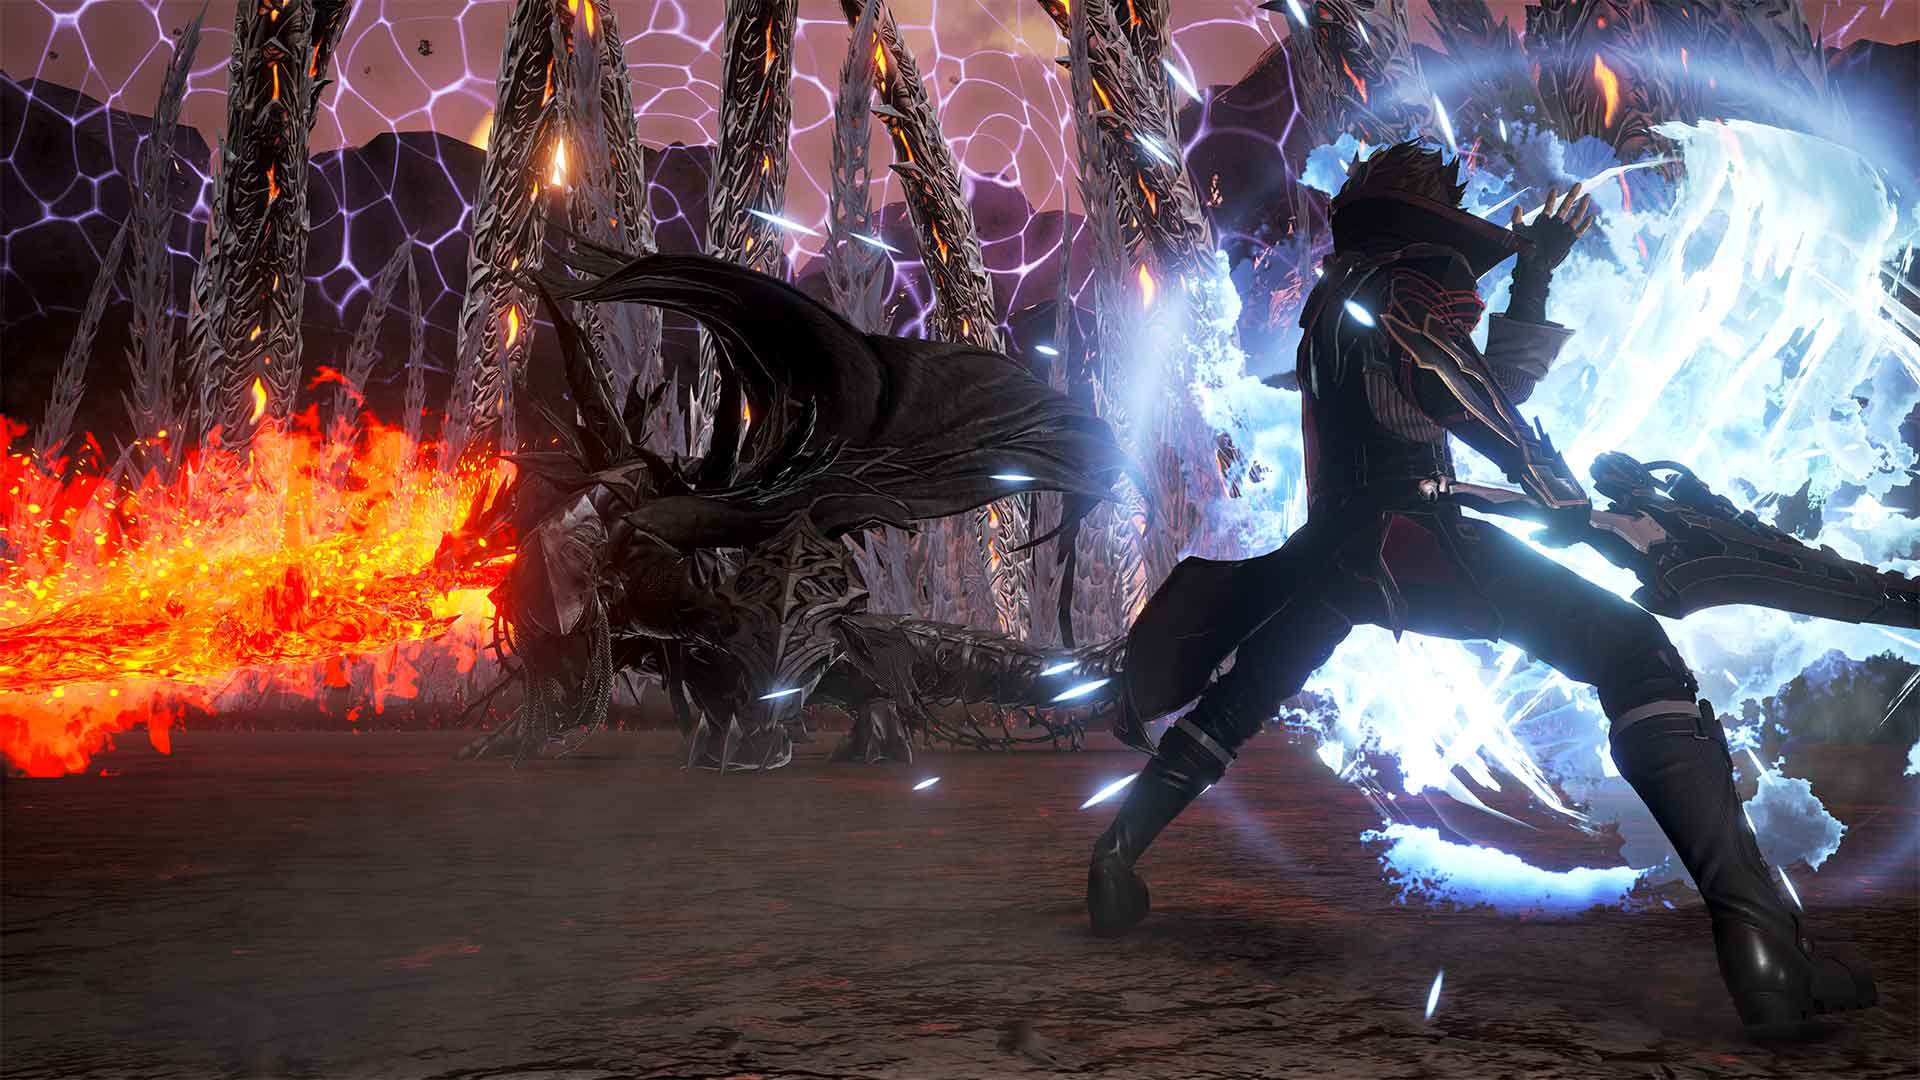 Bandai Namco US on X: #CODEVEIN DLC 1 HELLFIRE KNIGHT is now available!  Gear up with all new weapons and take on this challenging new boss! CODE  VEIN available now on PS4